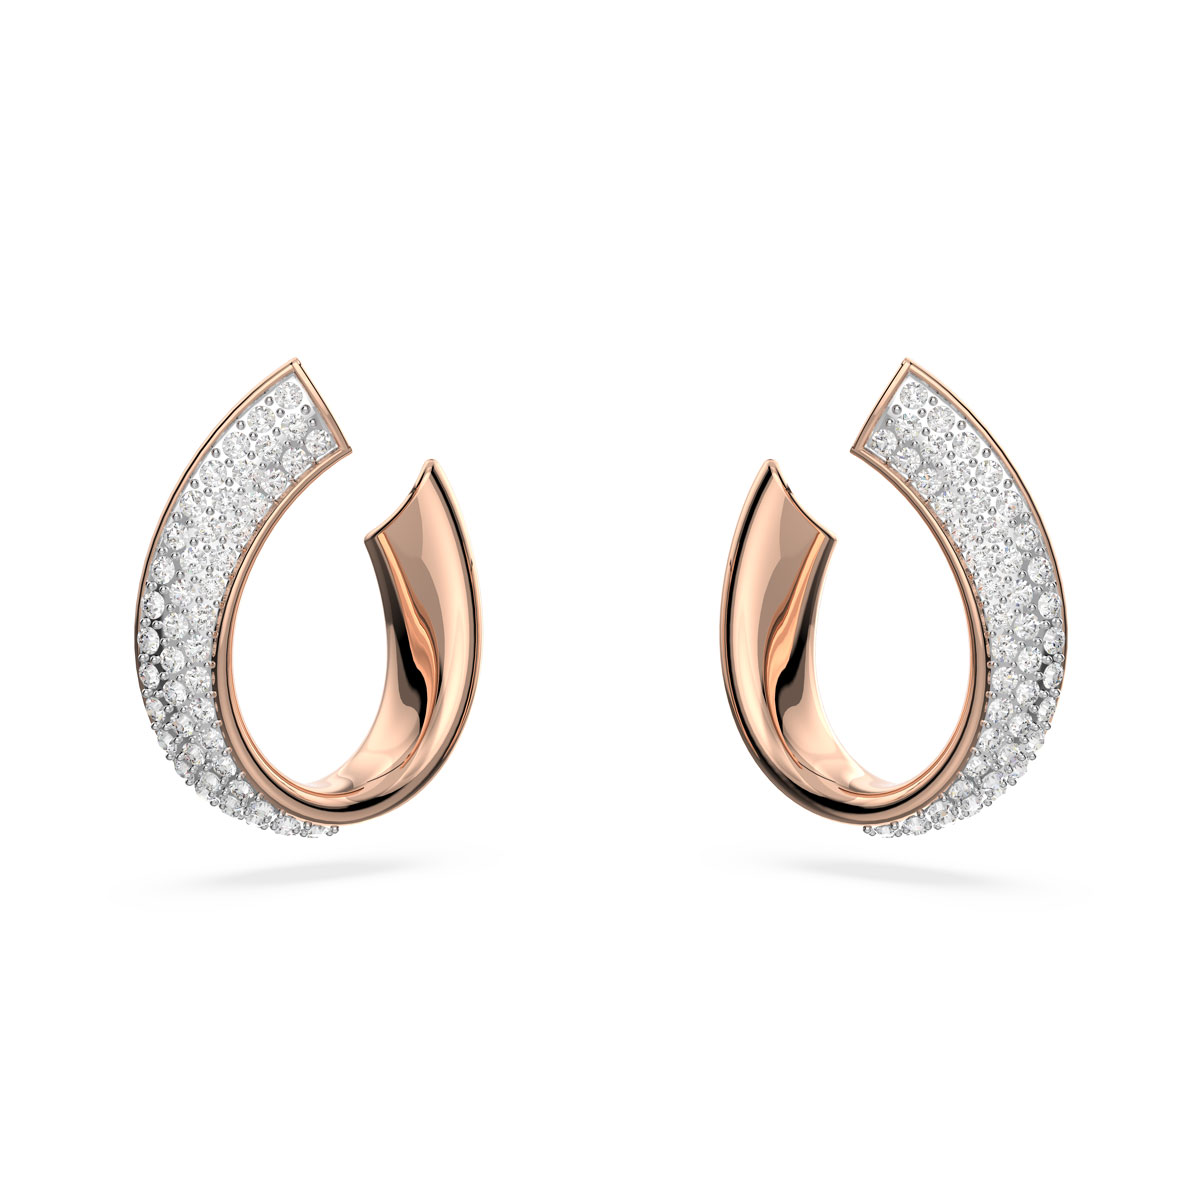 Swarovski Jewelry and Gold Exist Small Hoop Pierced Earrings, Pair